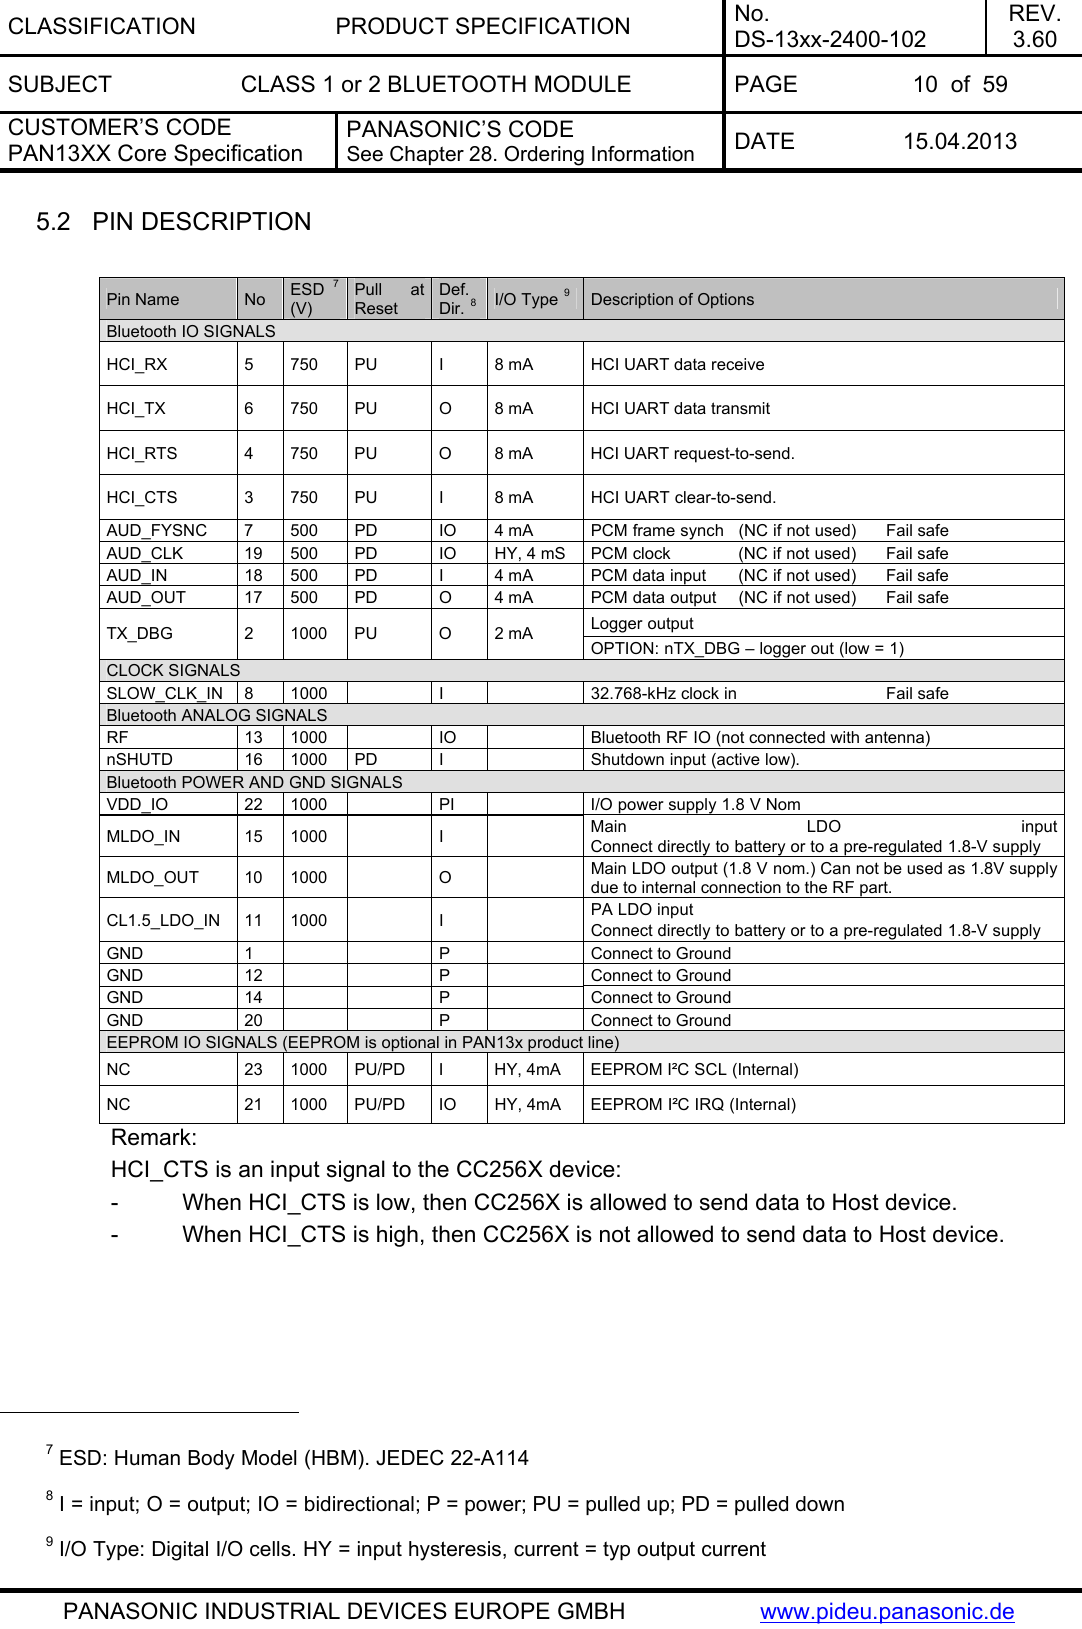 CLASSIFICATION PRODUCT SPECIFICATION No. DS-13xx-2400-102 REV. 3.60 SUBJECT  CLASS 1 or 2 BLUETOOTH MODULE  PAGE  10  of  59 CUSTOMER’S CODE PAN13XX Core Specification PANASONIC’S CODE See Chapter 28. Ordering Information  DATE 15.04.2013   PANASONIC INDUSTRIAL DEVICES EUROPE GMBH  www.pideu.panasonic.de  5.2  PIN DESCRIPTION  Pin Name  No  ESD  7 (V) Pull at Reset Def. Dir. 8 I/O Type 9 Description of Options Bluetooth IO SIGNALS HCI_RX  5  750  PU  I  8 mA  HCI UART data receive HCI_TX  6  750  PU  O  8 mA  HCI UART data transmit HCI_RTS  4  750  PU  O  8 mA  HCI UART request-to-send. HCI_CTS  3  750  PU  I  8 mA  HCI UART clear-to-send. AUD_FYSNC  7  500  PD  IO  4 mA  PCM frame synch  (NC if not used)  Fail safe AUD_CLK  19  500  PD  IO  HY, 4 mS  PCM clock  (NC if not used)  Fail safe AUD_IN  18  500  PD  I  4 mA  PCM data input  (NC if not used)  Fail safe AUD_OUT  17  500  PD  O  4 mA  PCM data output  (NC if not used)  Fail safe Logger output TX_DBG 2 1000 PU O 2 mA OPTION: nTX_DBG – logger out (low = 1) CLOCK SIGNALS SLOW_CLK_IN  8  1000    I    32.768-kHz clock in     Fail safe Bluetooth ANALOG SIGNALS RF  13  1000    IO    Bluetooth RF IO (not connected with antenna) nSHUTD  16  1000  PD  I    Shutdown input (active low). Bluetooth POWER AND GND SIGNALS VDD_IO  22  1000    PI    I/O power supply 1.8 V Nom MLDO_IN 15 1000   I   Main LDO inputConnect directly to battery or to a pre-regulated 1.8-V supply MLDO_OUT 10 1000   O   Main LDO output (1.8 V nom.) Can not be used as 1.8V supply due to internal connection to the RF part. CL1.5_LDO_IN 11  1000    I    PA LDO input Connect directly to battery or to a pre-regulated 1.8-V supply GND 1   P  Connect to Ground GND 12   P  Connect to Ground GND 14   P  Connect to Ground GND 20   P  Connect to Ground EEPROM IO SIGNALS (EEPROM is optional in PAN13x product line) NC  23  1000  PU/PD  I  HY, 4mA  EEPROM I²C SCL (Internal) NC  21  1000  PU/PD  IO  HY, 4mA  EEPROM I²C IRQ (Internal) Remark: HCI_CTS is an input signal to the CC256X device: -          When HCI_CTS is low, then CC256X is allowed to send data to Host device. -          When HCI_CTS is high, then CC256X is not allowed to send data to Host device.                                                   7 ESD: Human Body Model (HBM). JEDEC 22-A114 8 I = input; O = output; IO = bidirectional; P = power; PU = pulled up; PD = pulled down 9 I/O Type: Digital I/O cells. HY = input hysteresis, current = typ output current 